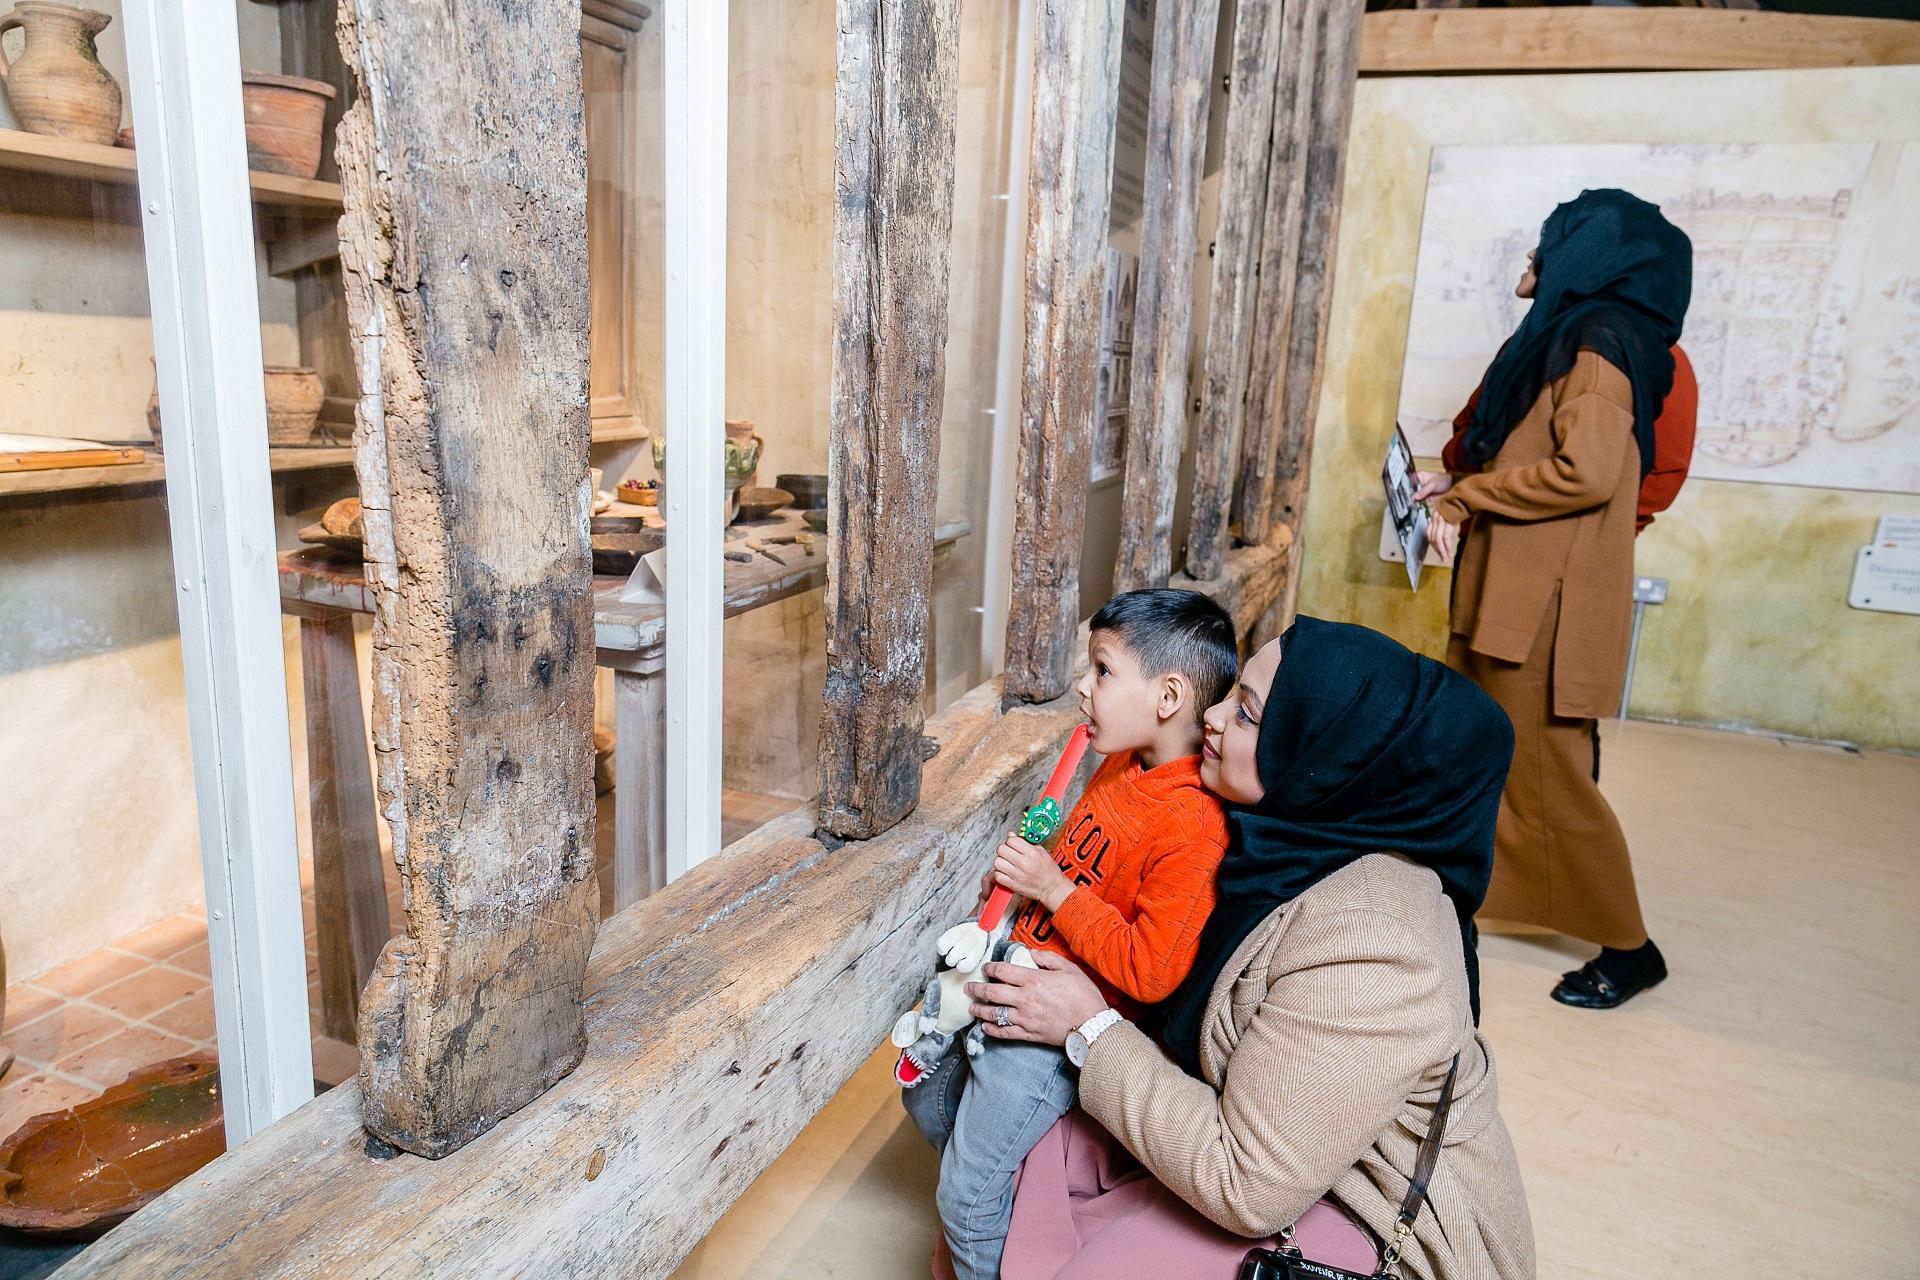 A woman and a child looking at objects in a display case.